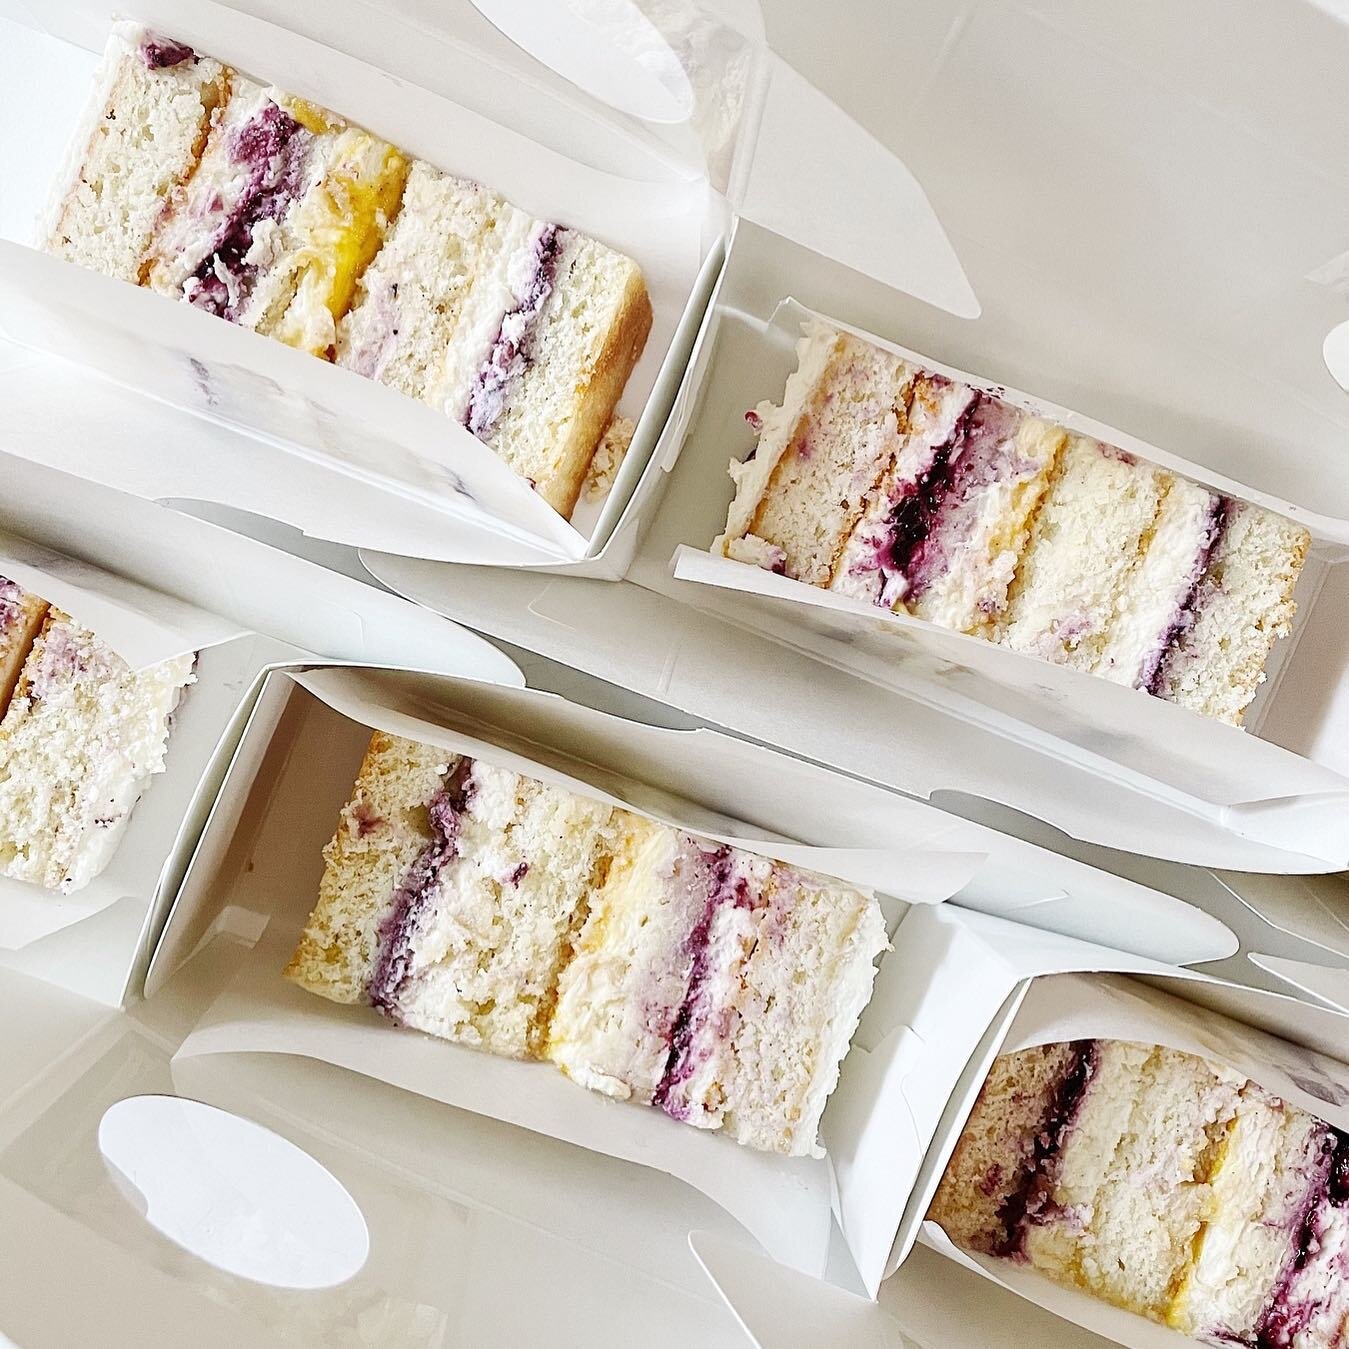 Cake slices for guests to go. My bride came up with this brilliant idea. You can totally break the rules when planning a wedding during COVID. We never thought we would do packaged cake slices for guests to go. ⠀
⠀
The original plan is a 3-tier cake.